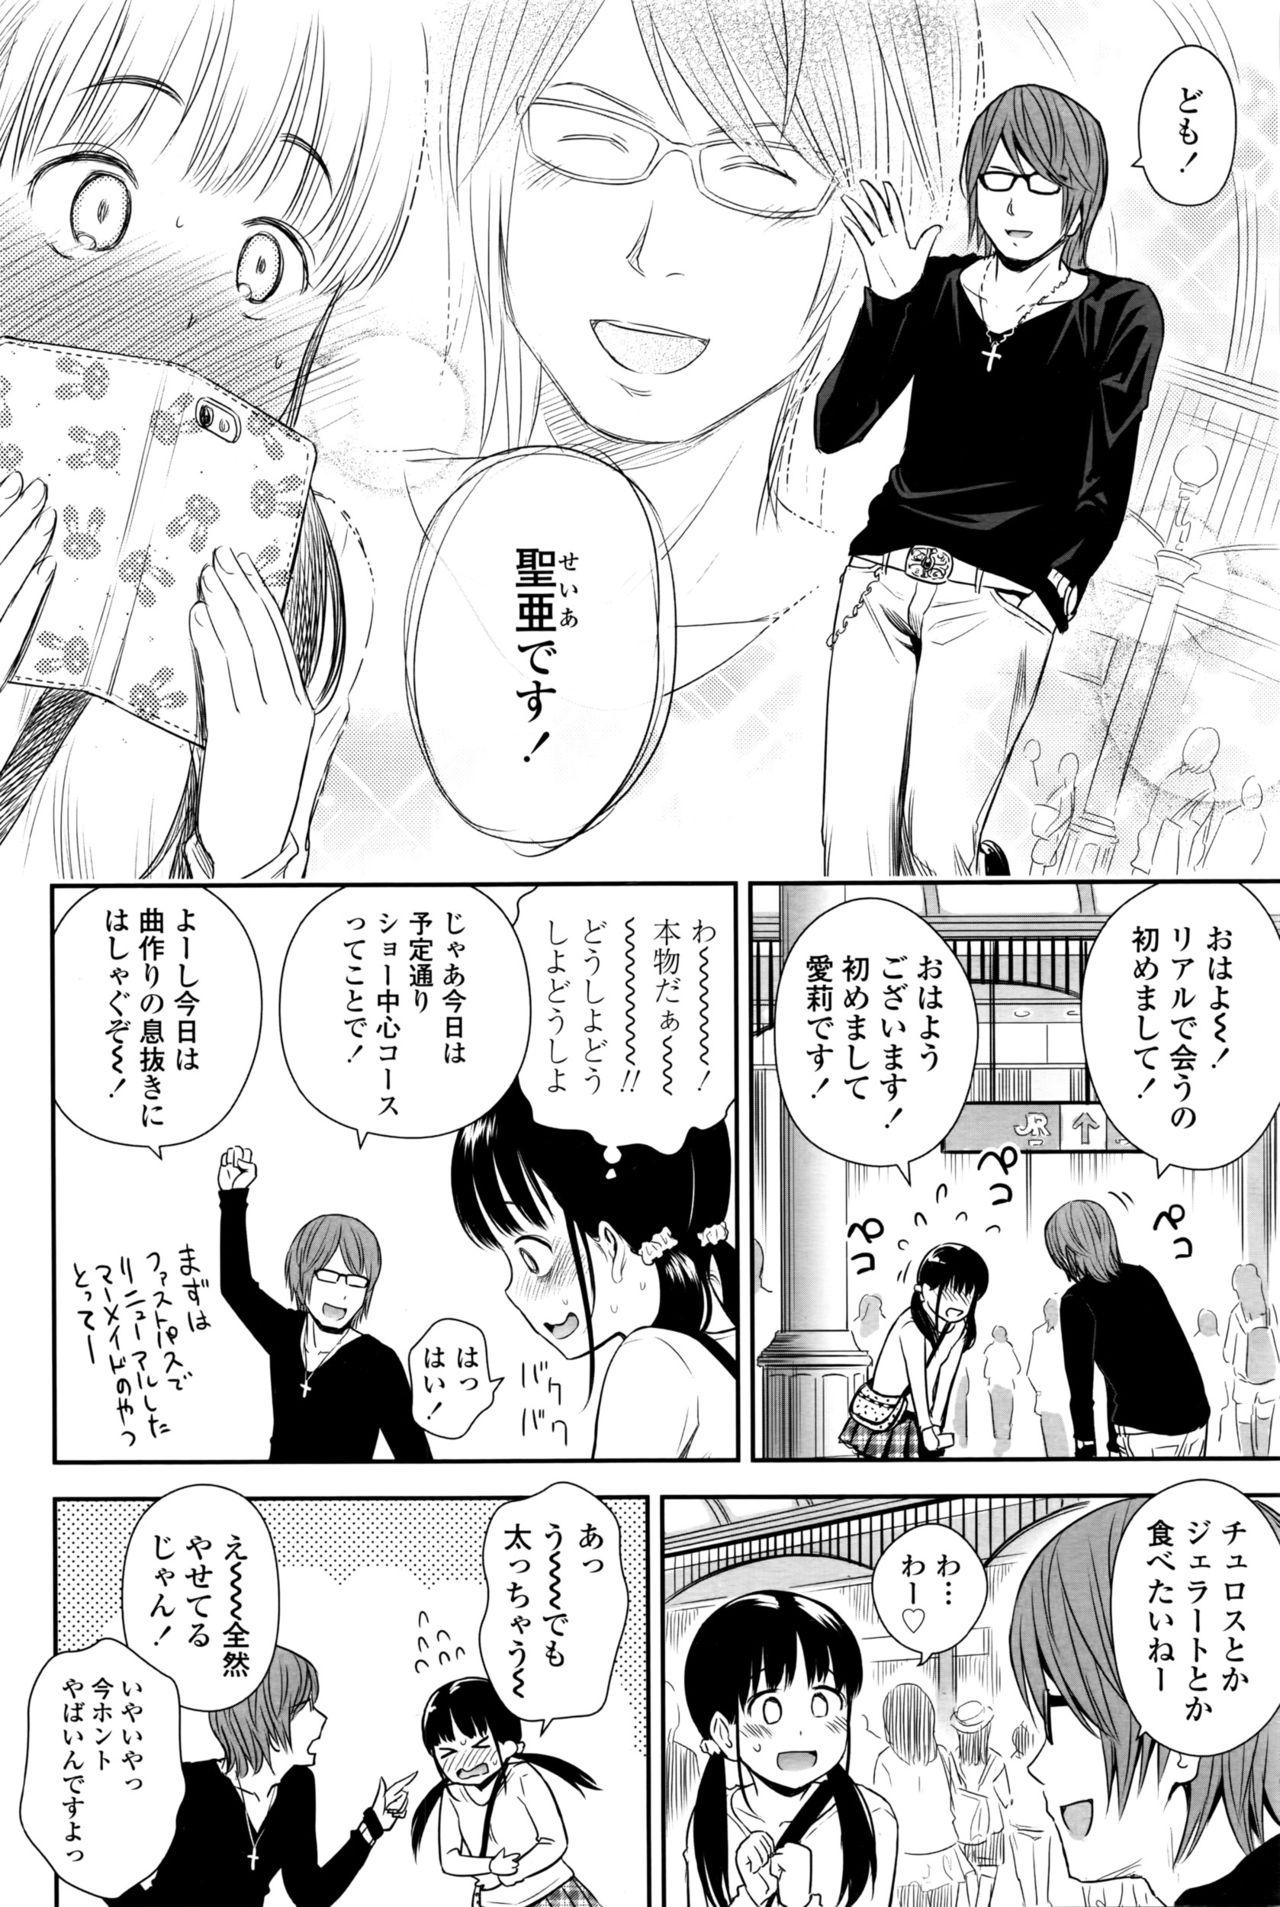 Roleplay Utaite no Ballad Ch. 2 Oldvsyoung - Page 4